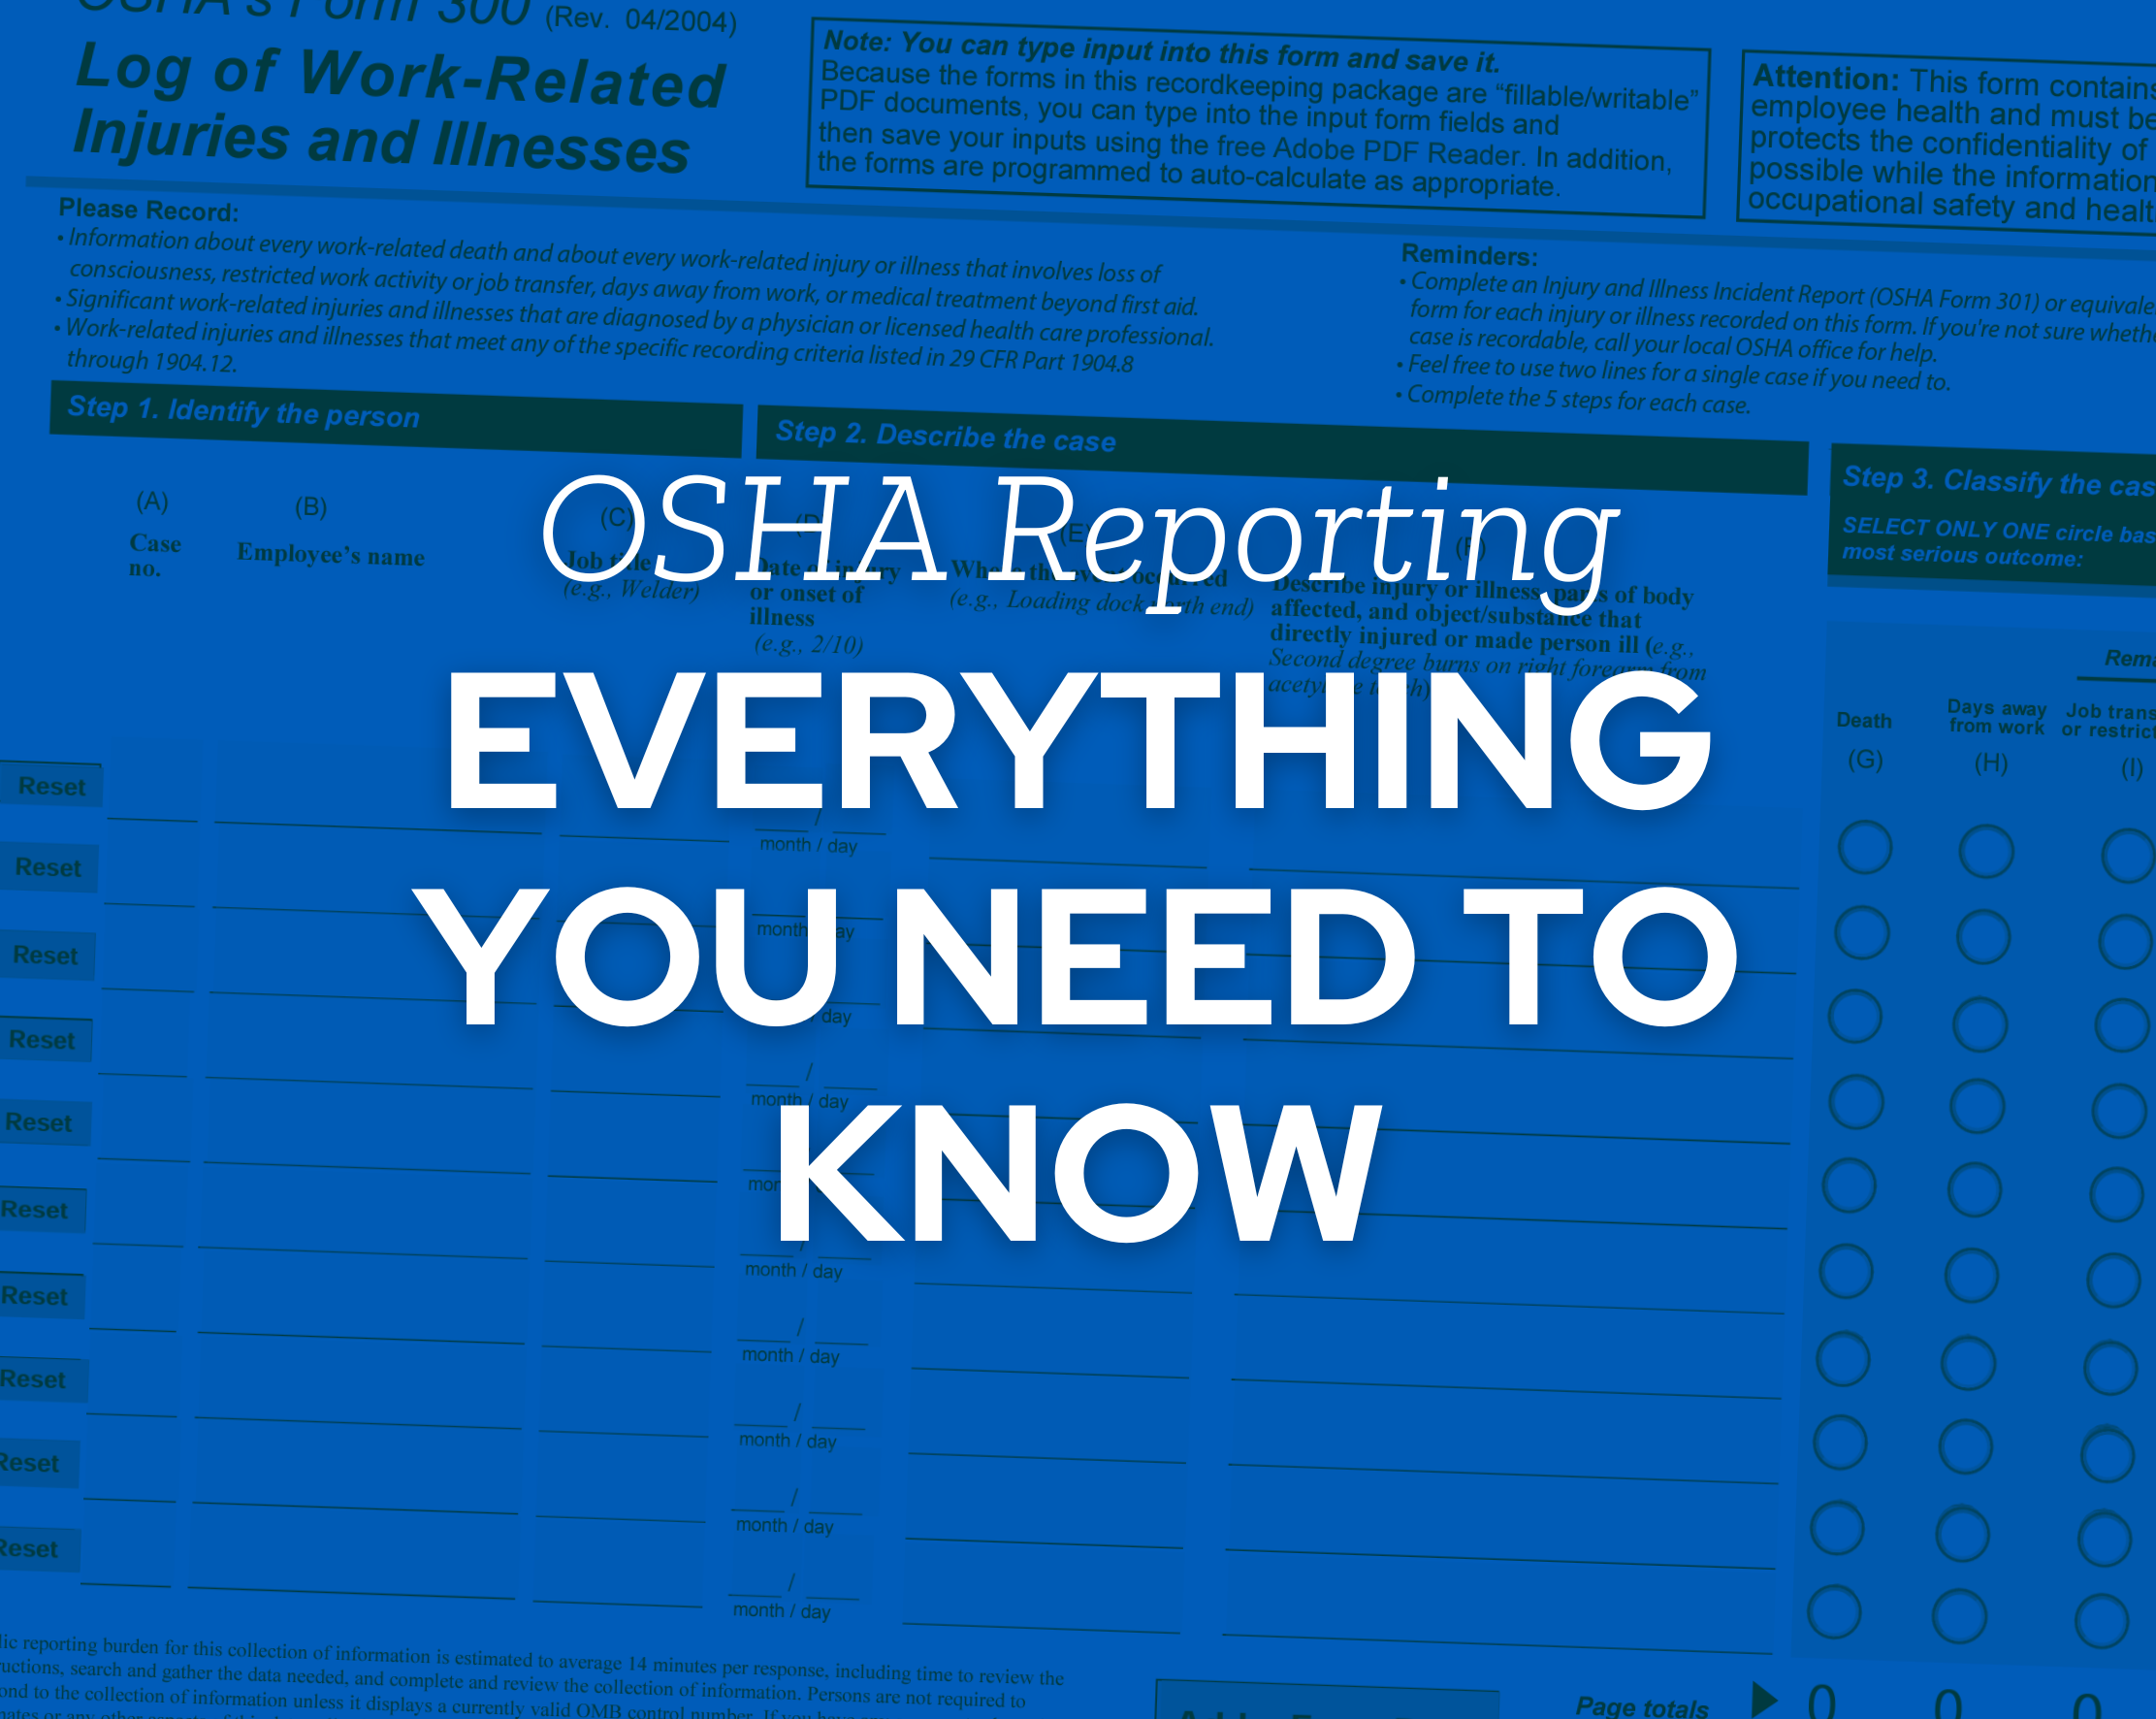 OSHA Reporting – Here’s What You Need To Know To Make Reporting Easy